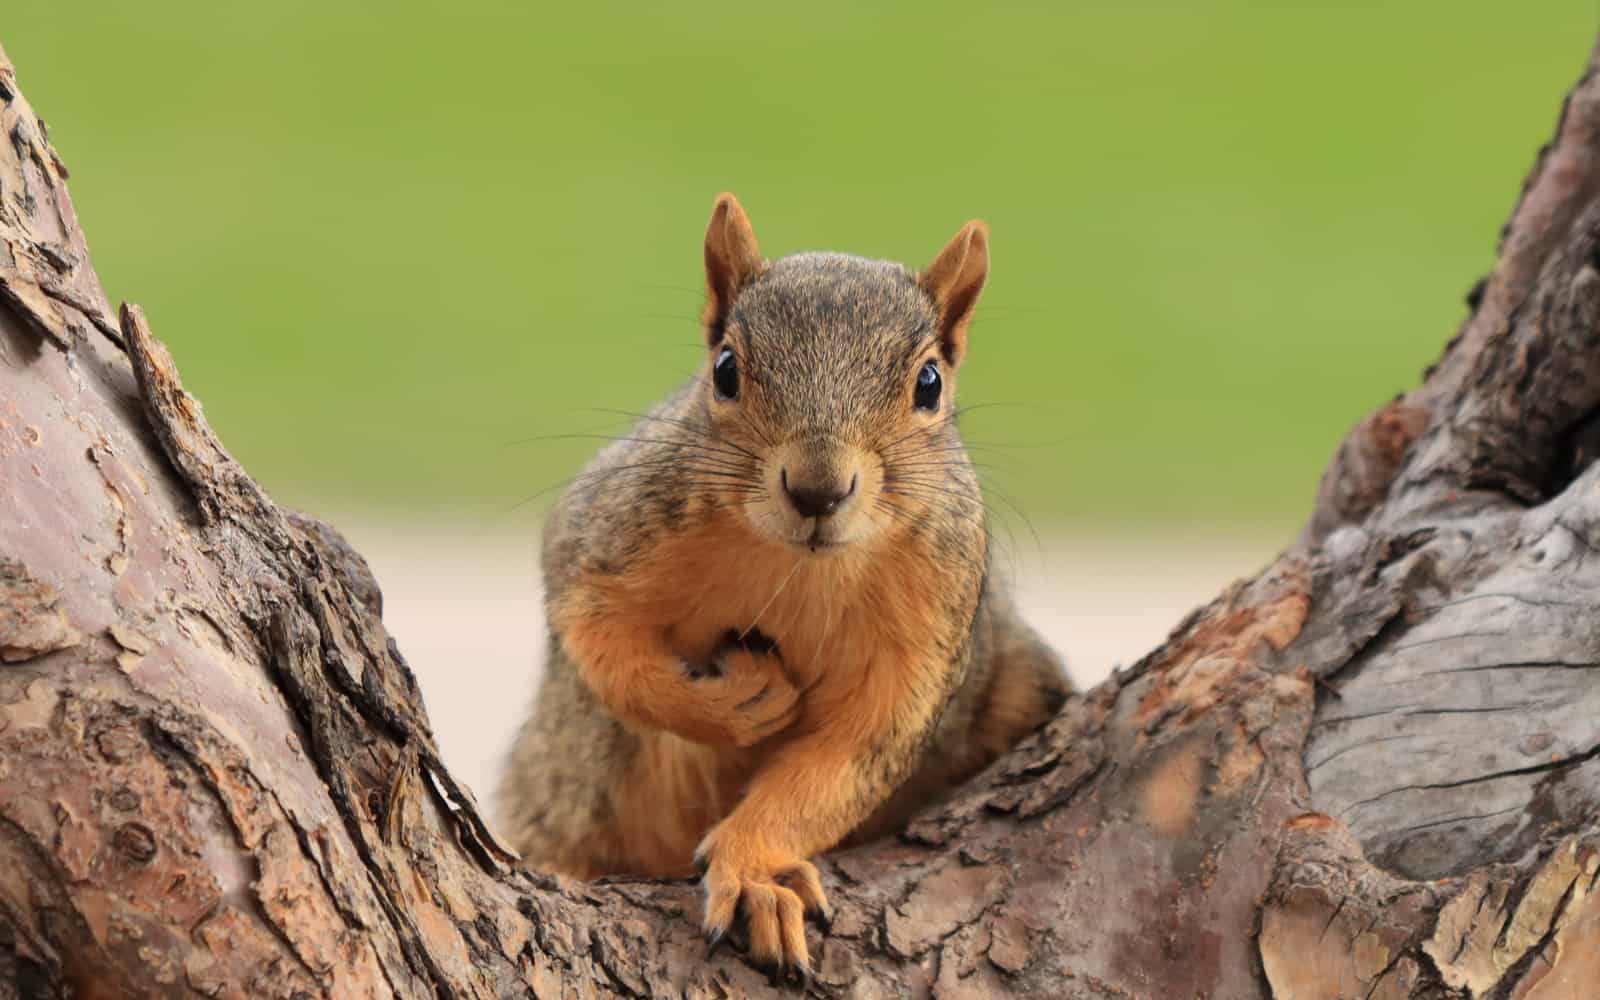 What is the maximum lifespan of a squirrel?